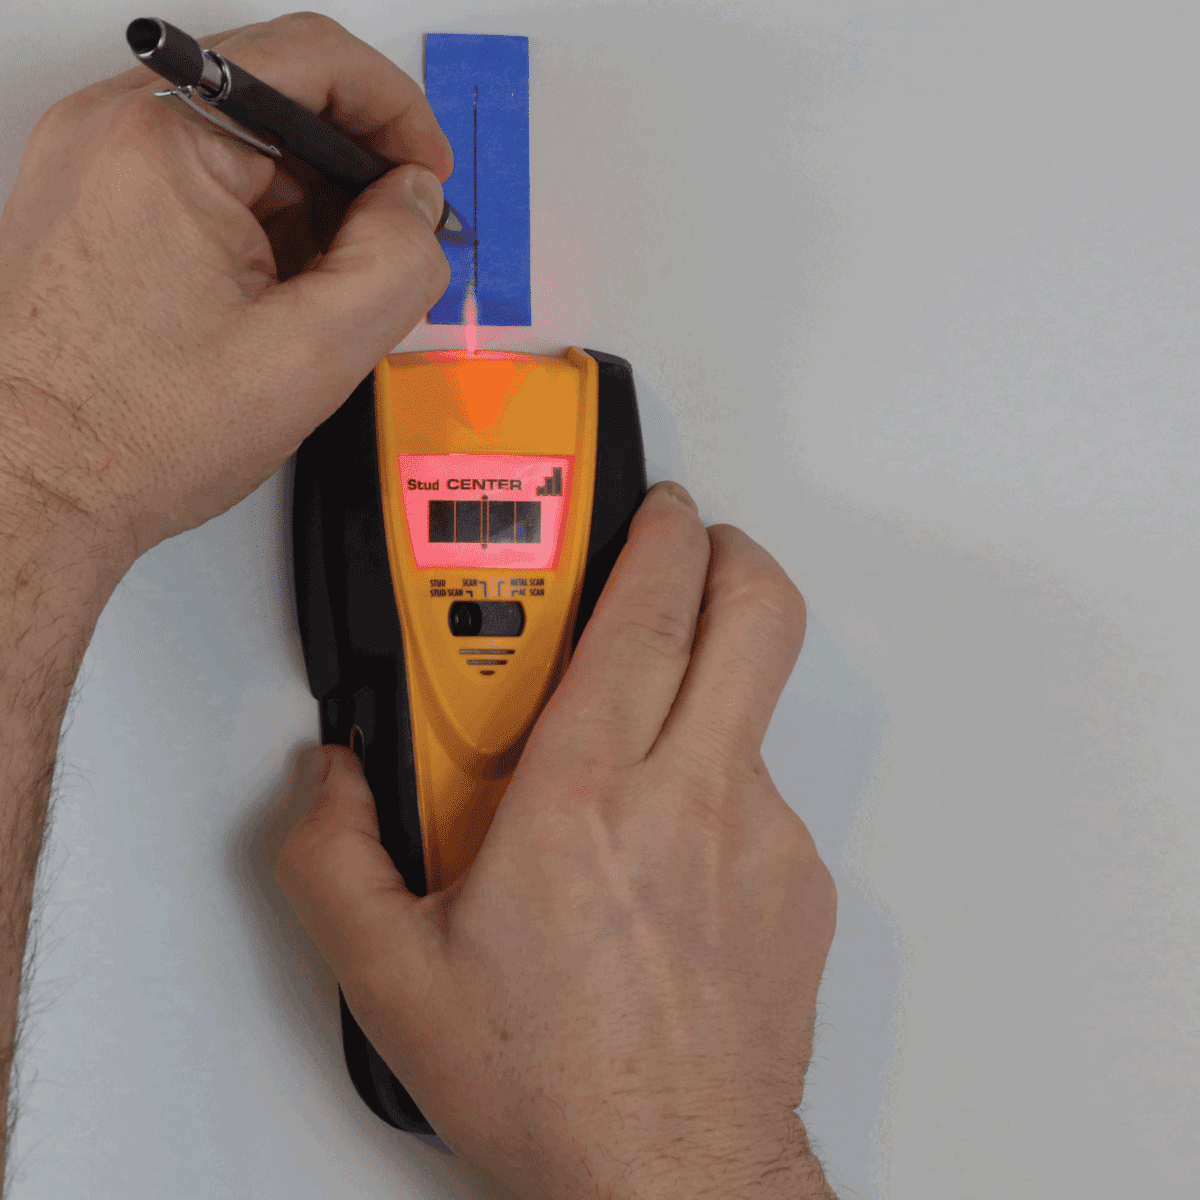 DIY using electronic stud finder to search wall for studs